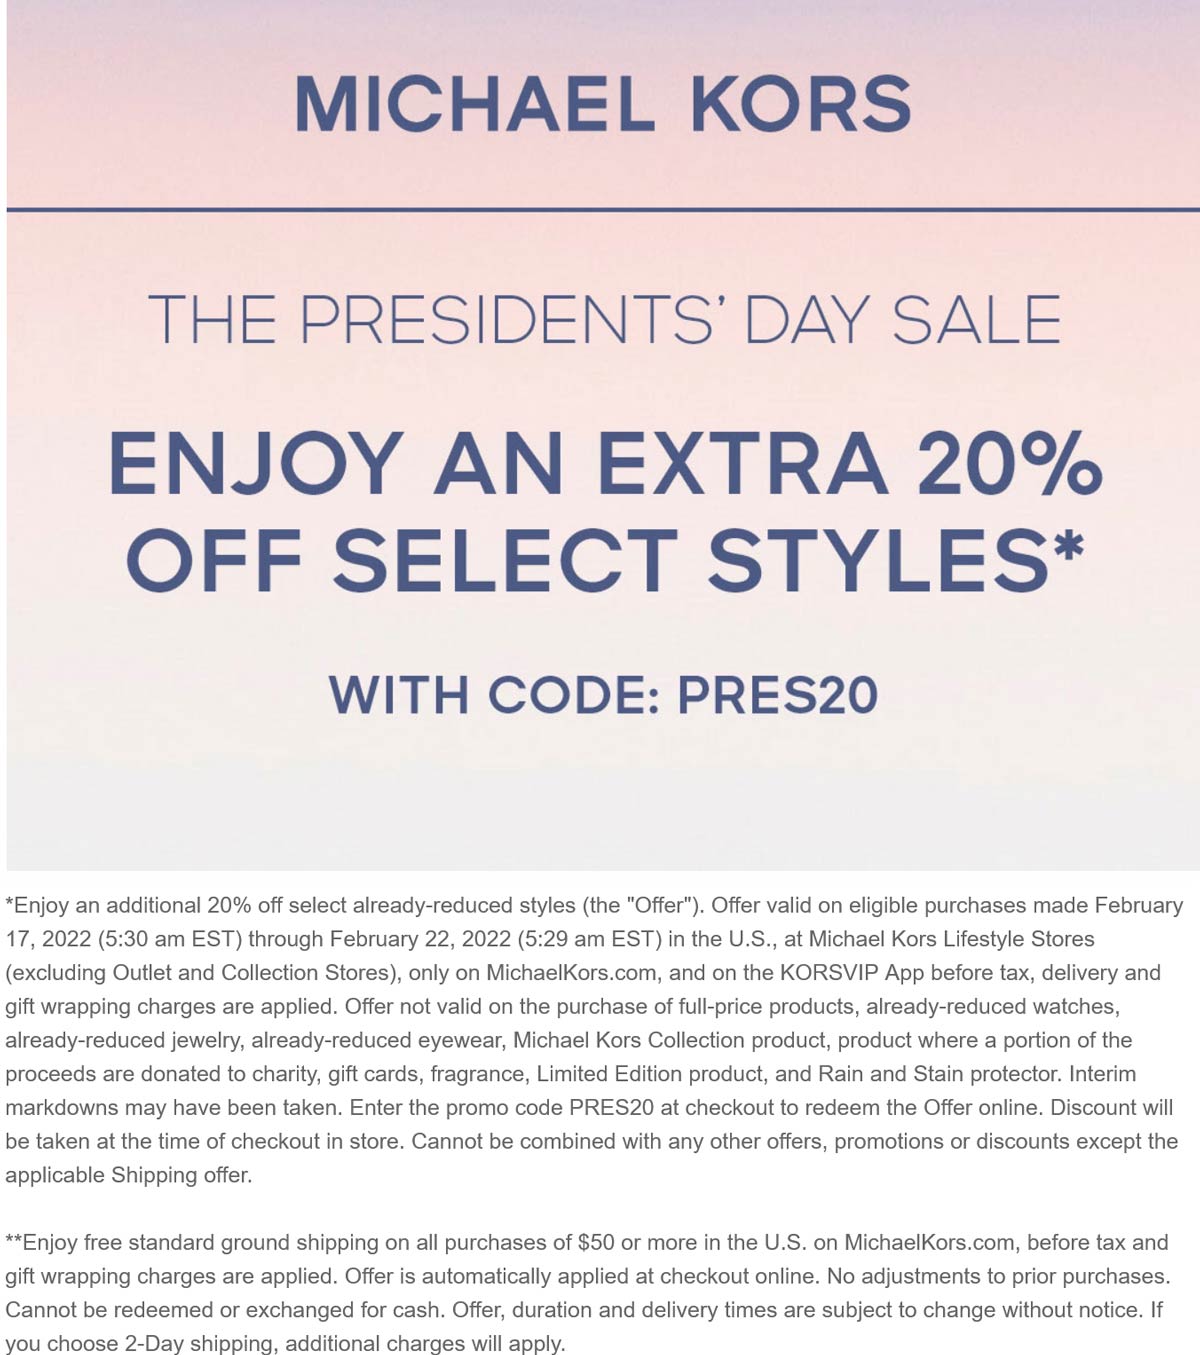 Michael Kors stores Coupon  Extra 20% off sale styles at Michael Kors, or online via promo code PRES20 #michaelkors 